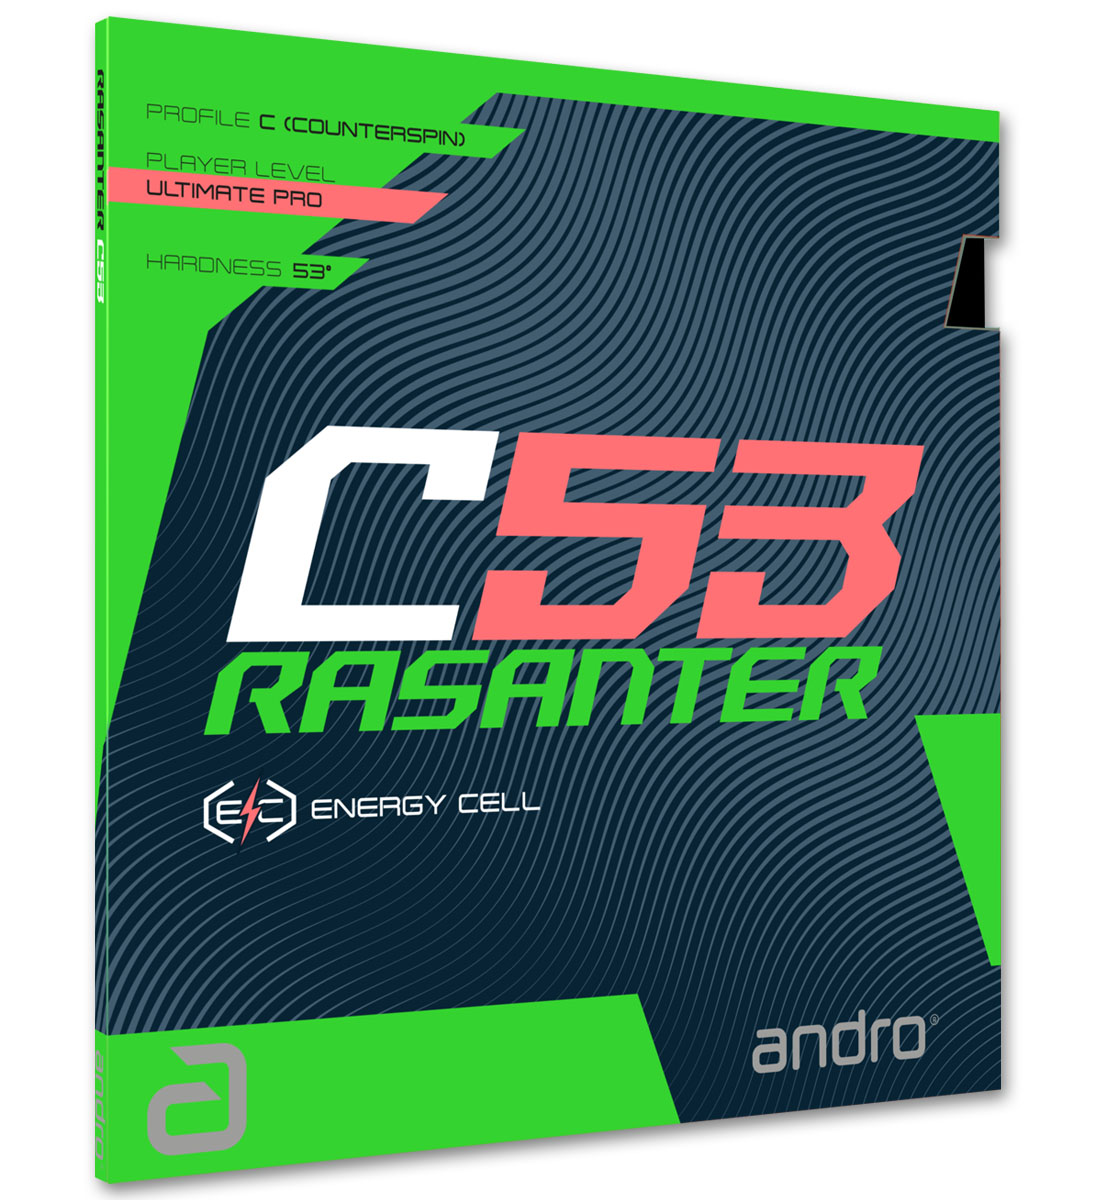 Andro Rasanter C53 Questions & Answers